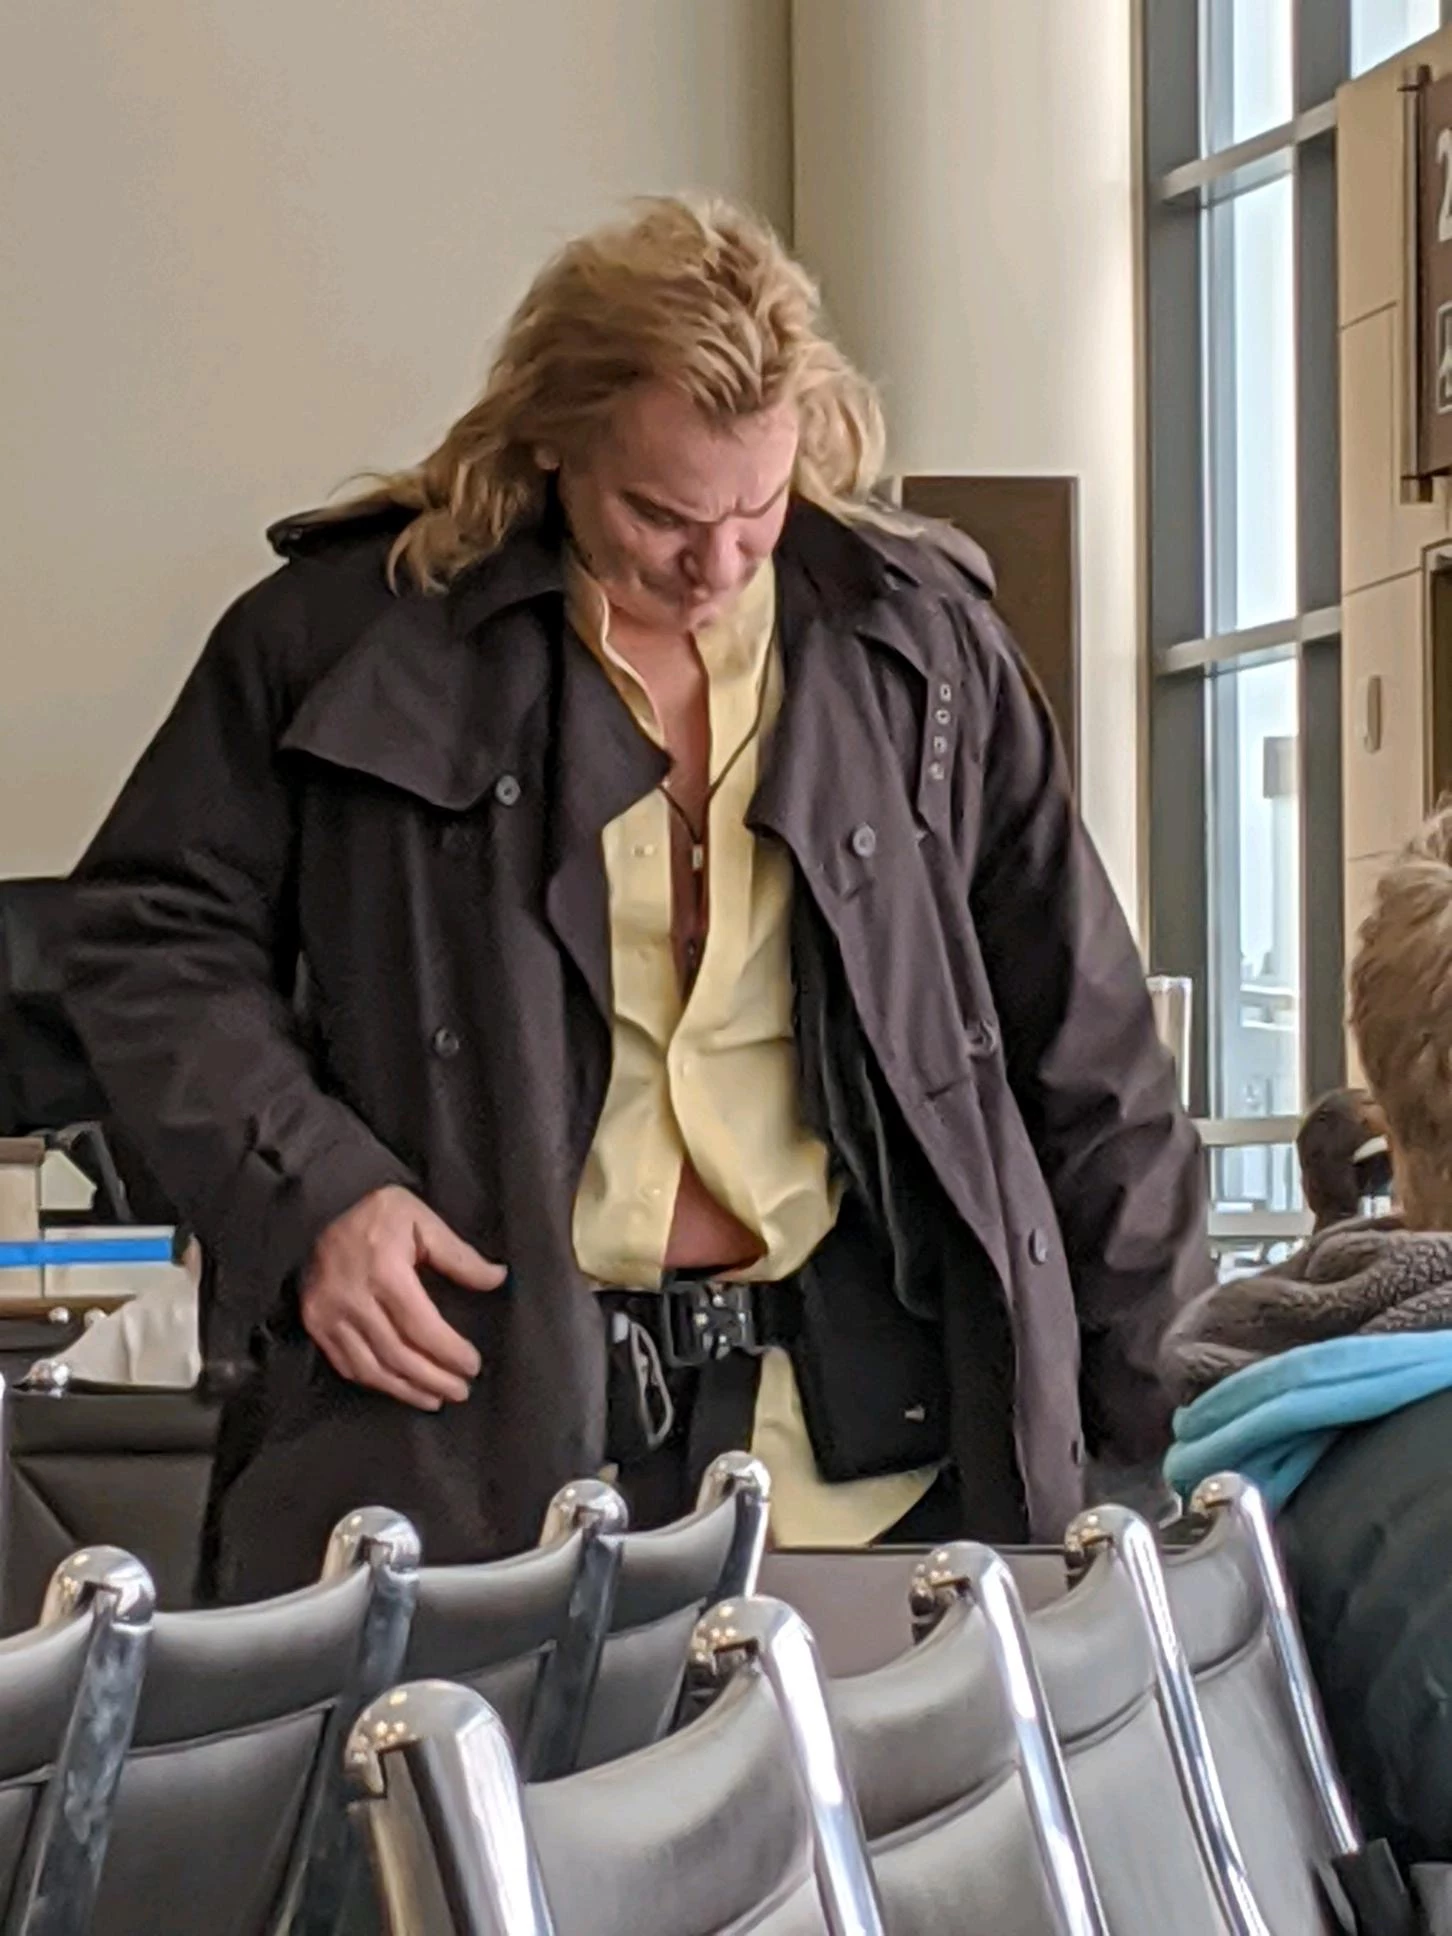 Porn Star Woodstock - Famous Porn Star Spotted At Kalamazoo Airport Sunday